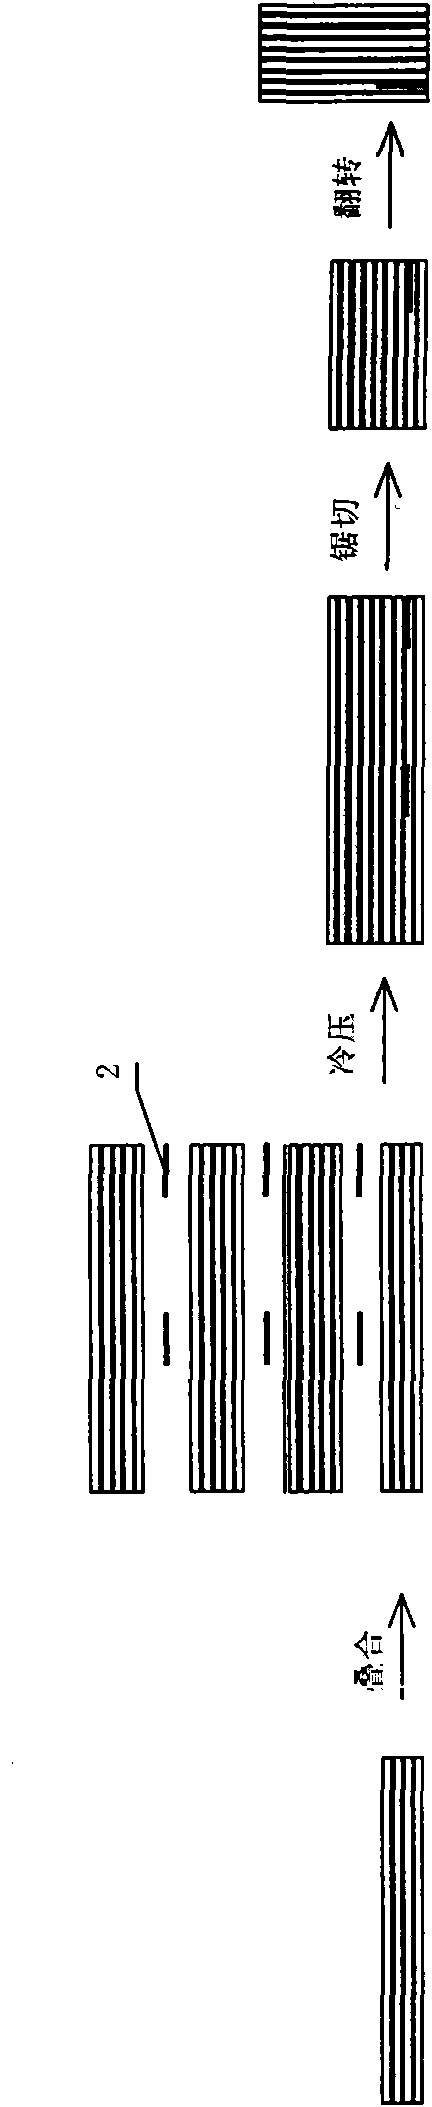 Carbon fiber fabric reinforced poplar laminated veneer lumber structural element and machining method thereof